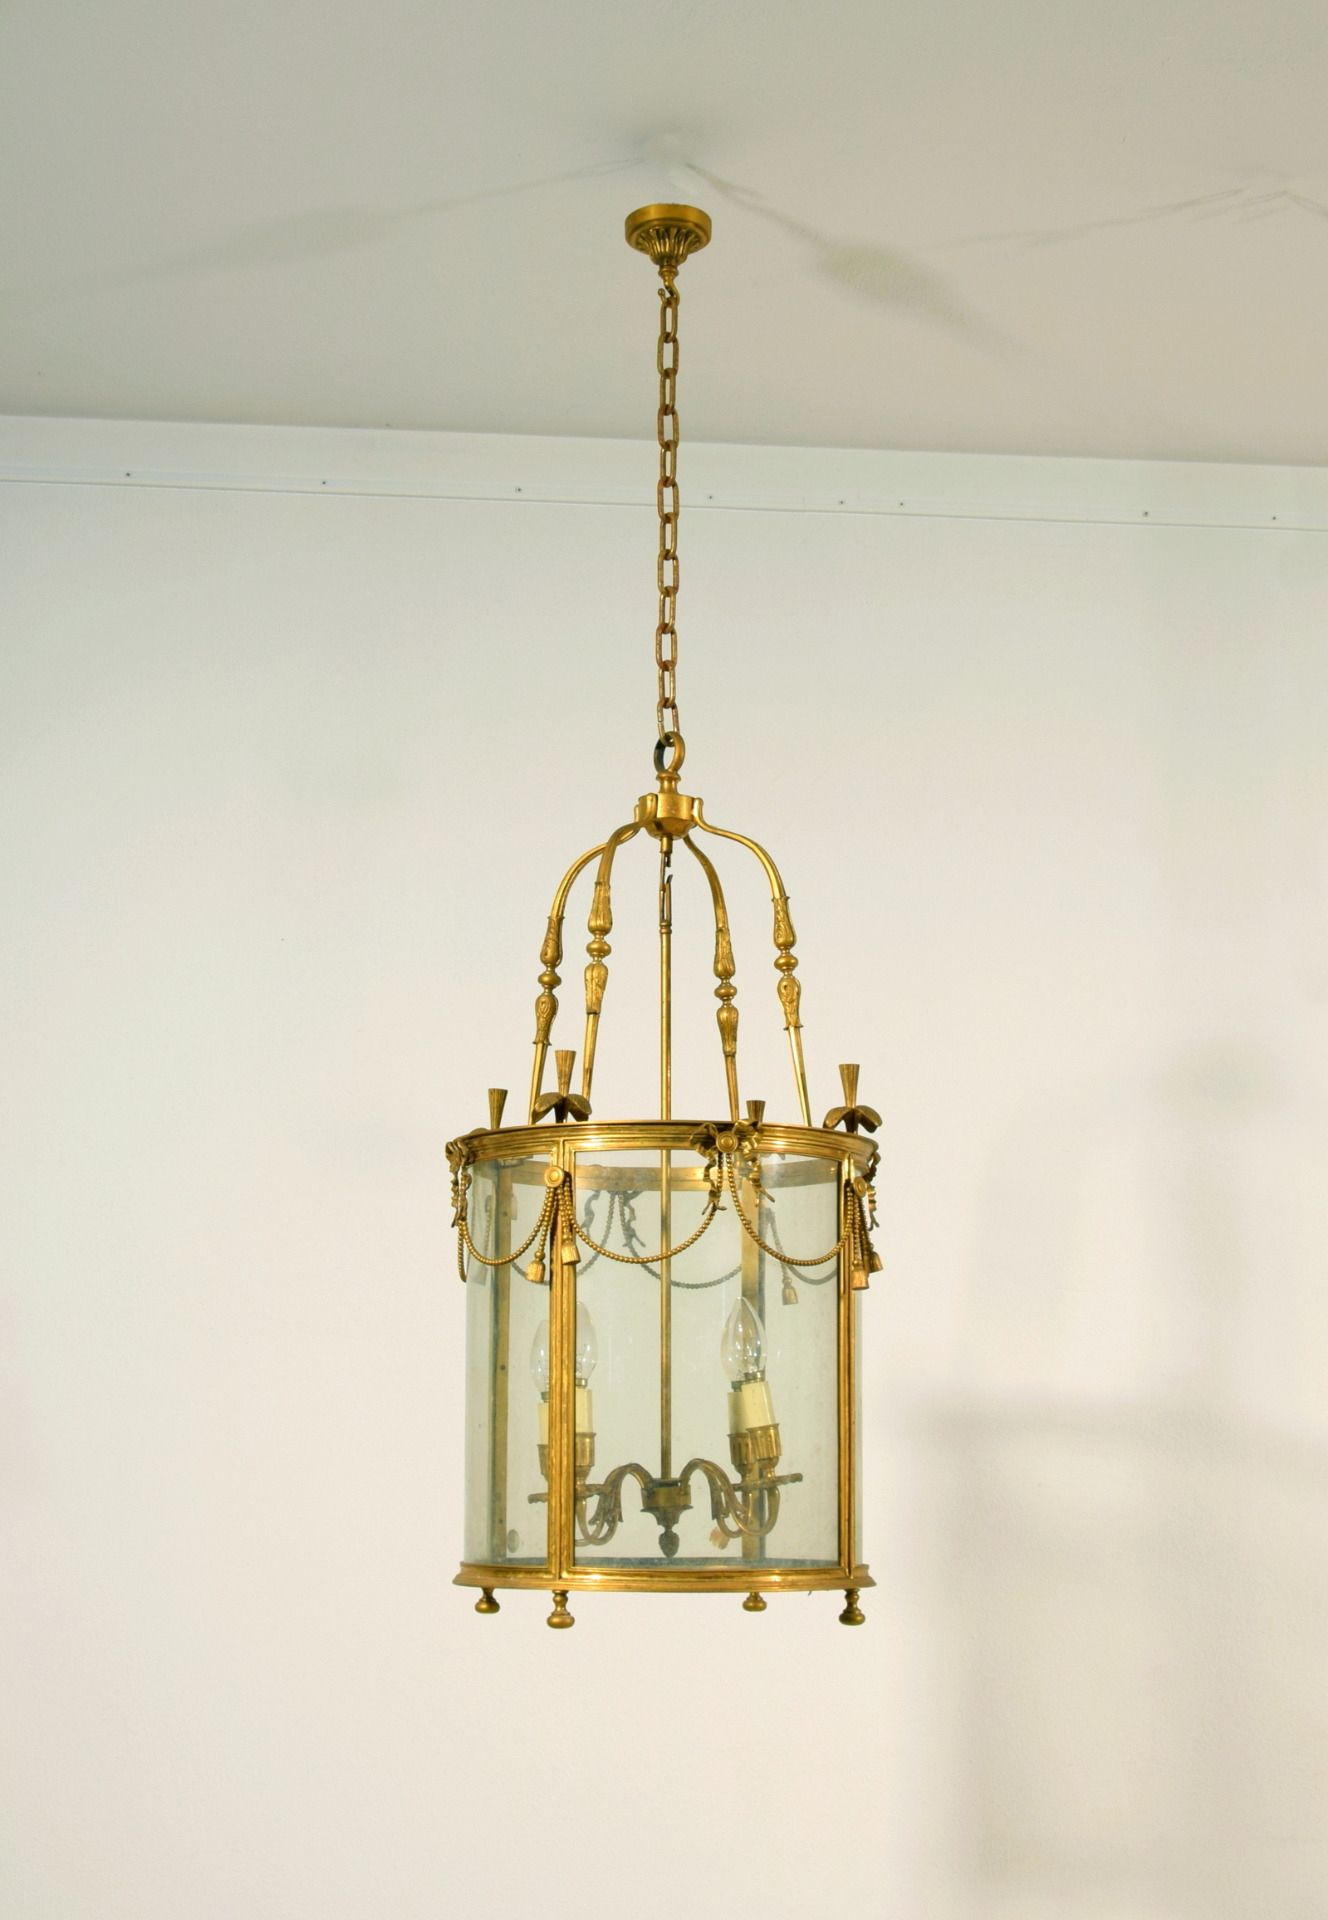 Four Light Gilt Bronze Lantern, France, Early 20th Century – Antique  Chandeliers Inside Current Four Light Lantern Chandeliers (View 1 of 15)